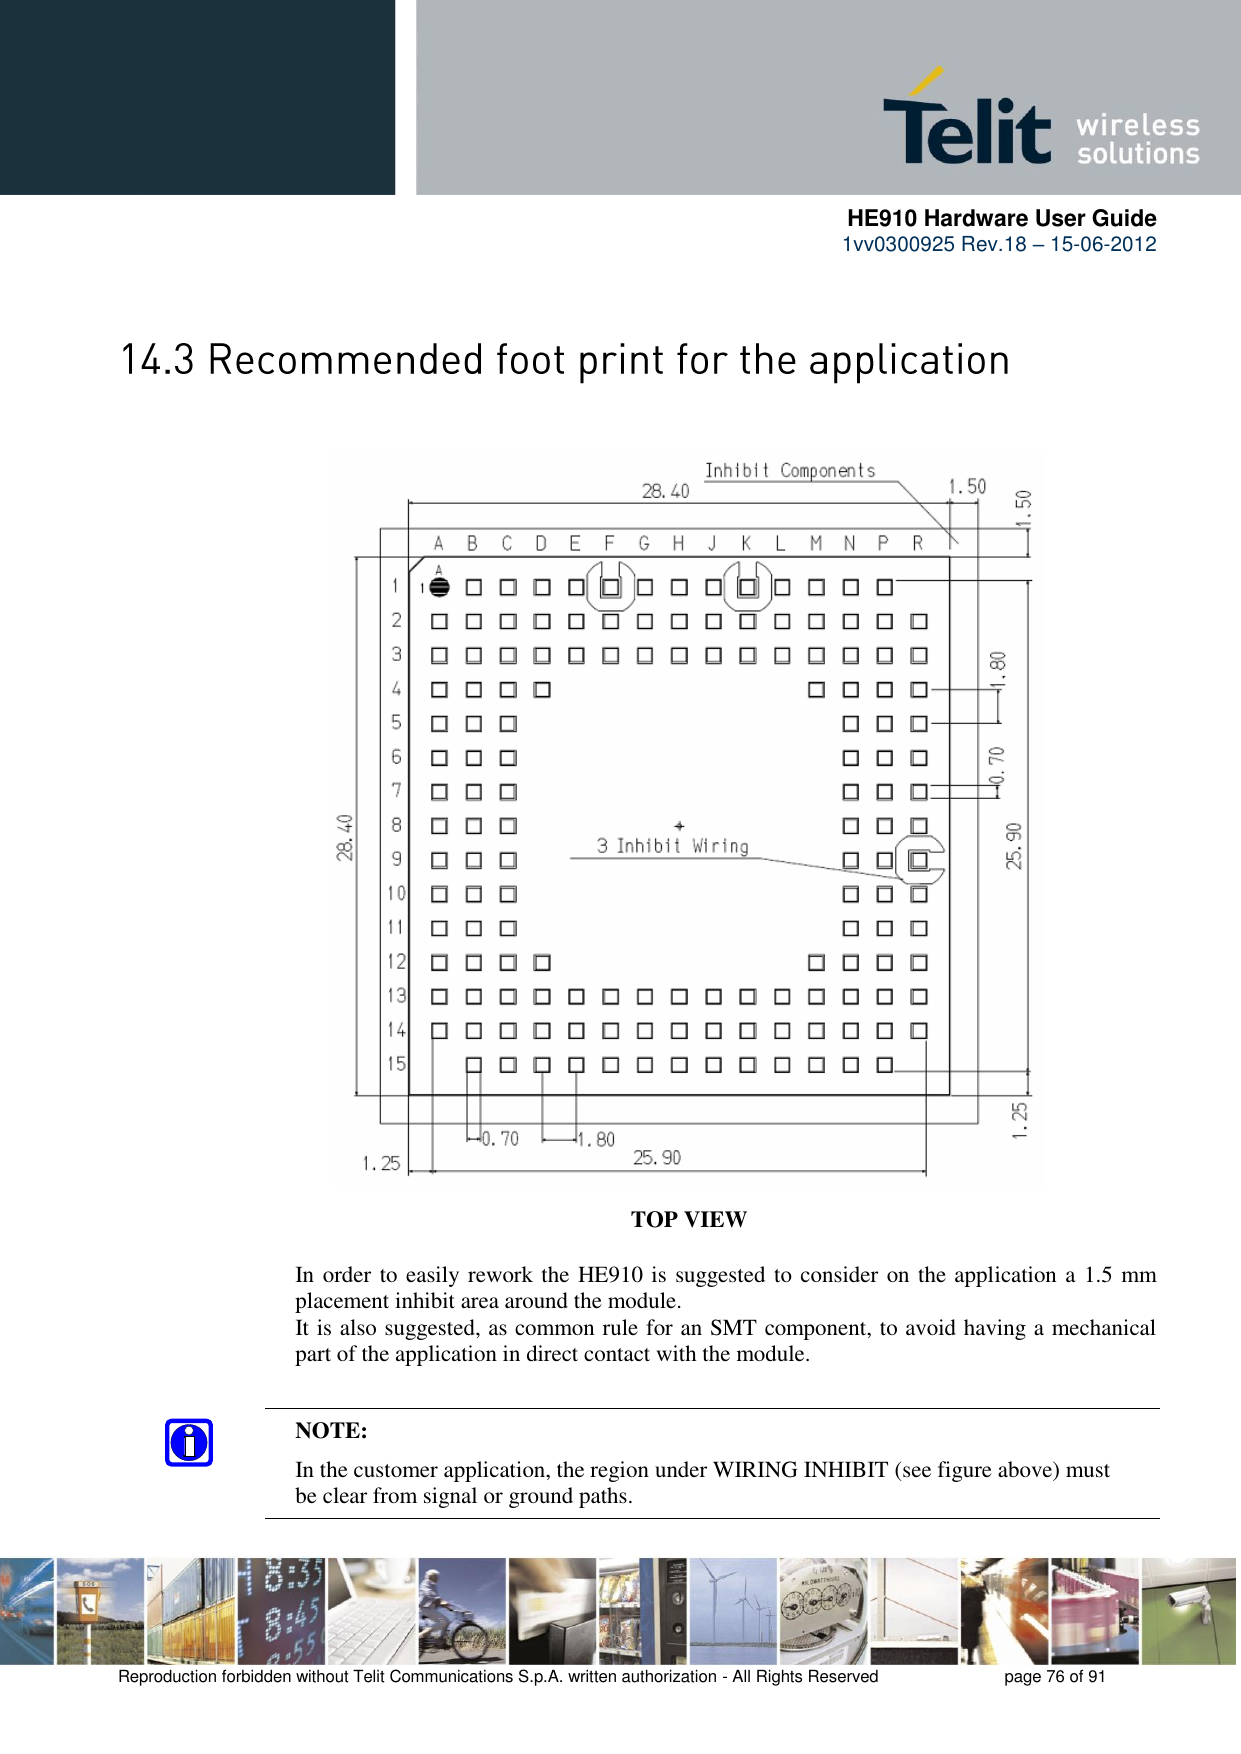      HE910 Hardware User Guide 1vv0300925 Rev.18 – 15-06-2012    Reproduction forbidden without Telit Communications S.p.A. written authorization - All Rights Reserved    page 76 of 91    TOP VIEW In order to easily rework the HE910 is suggested to consider on the application a 1.5 mm placement inhibit area around the module. It is also suggested, as common rule for an SMT component, to avoid having a mechanical part of the application in direct contact with the module. NOTE:   In the customer application, the region under WIRING INHIBIT (see figure above) must   be clear from signal or ground paths.  